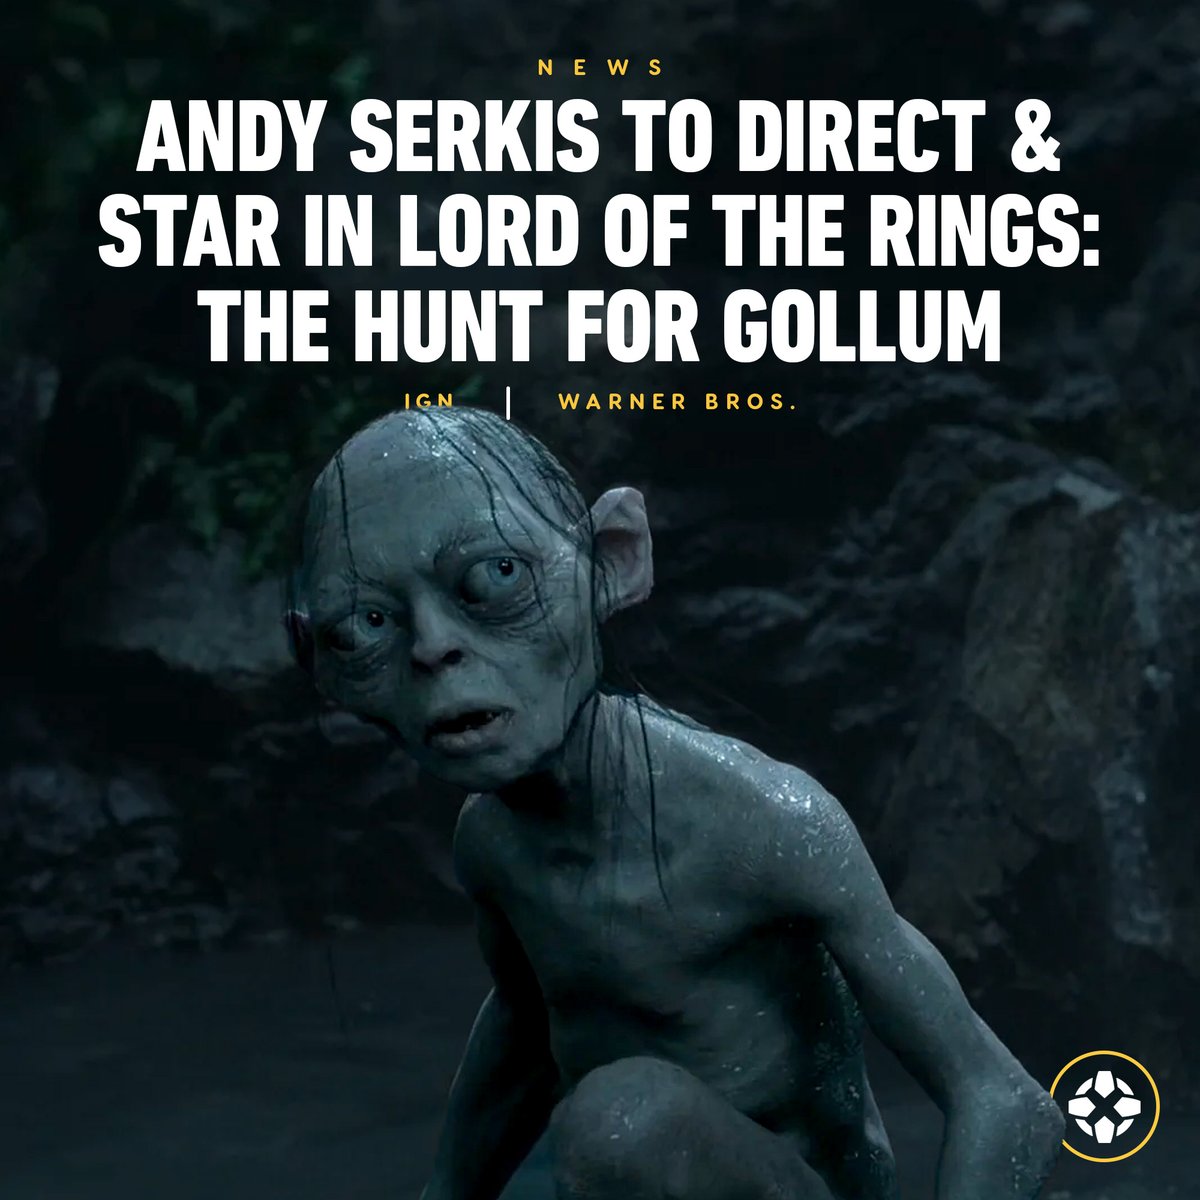 In an update to the news that a new Middle-earth film is on the way at Warner Bros., it is now revealed Andy Serkis will direct the upcoming Middle-earth film Lord of the Rings: The Hunt for Gollum while also reprising the role. bit.ly/3yn4NVW